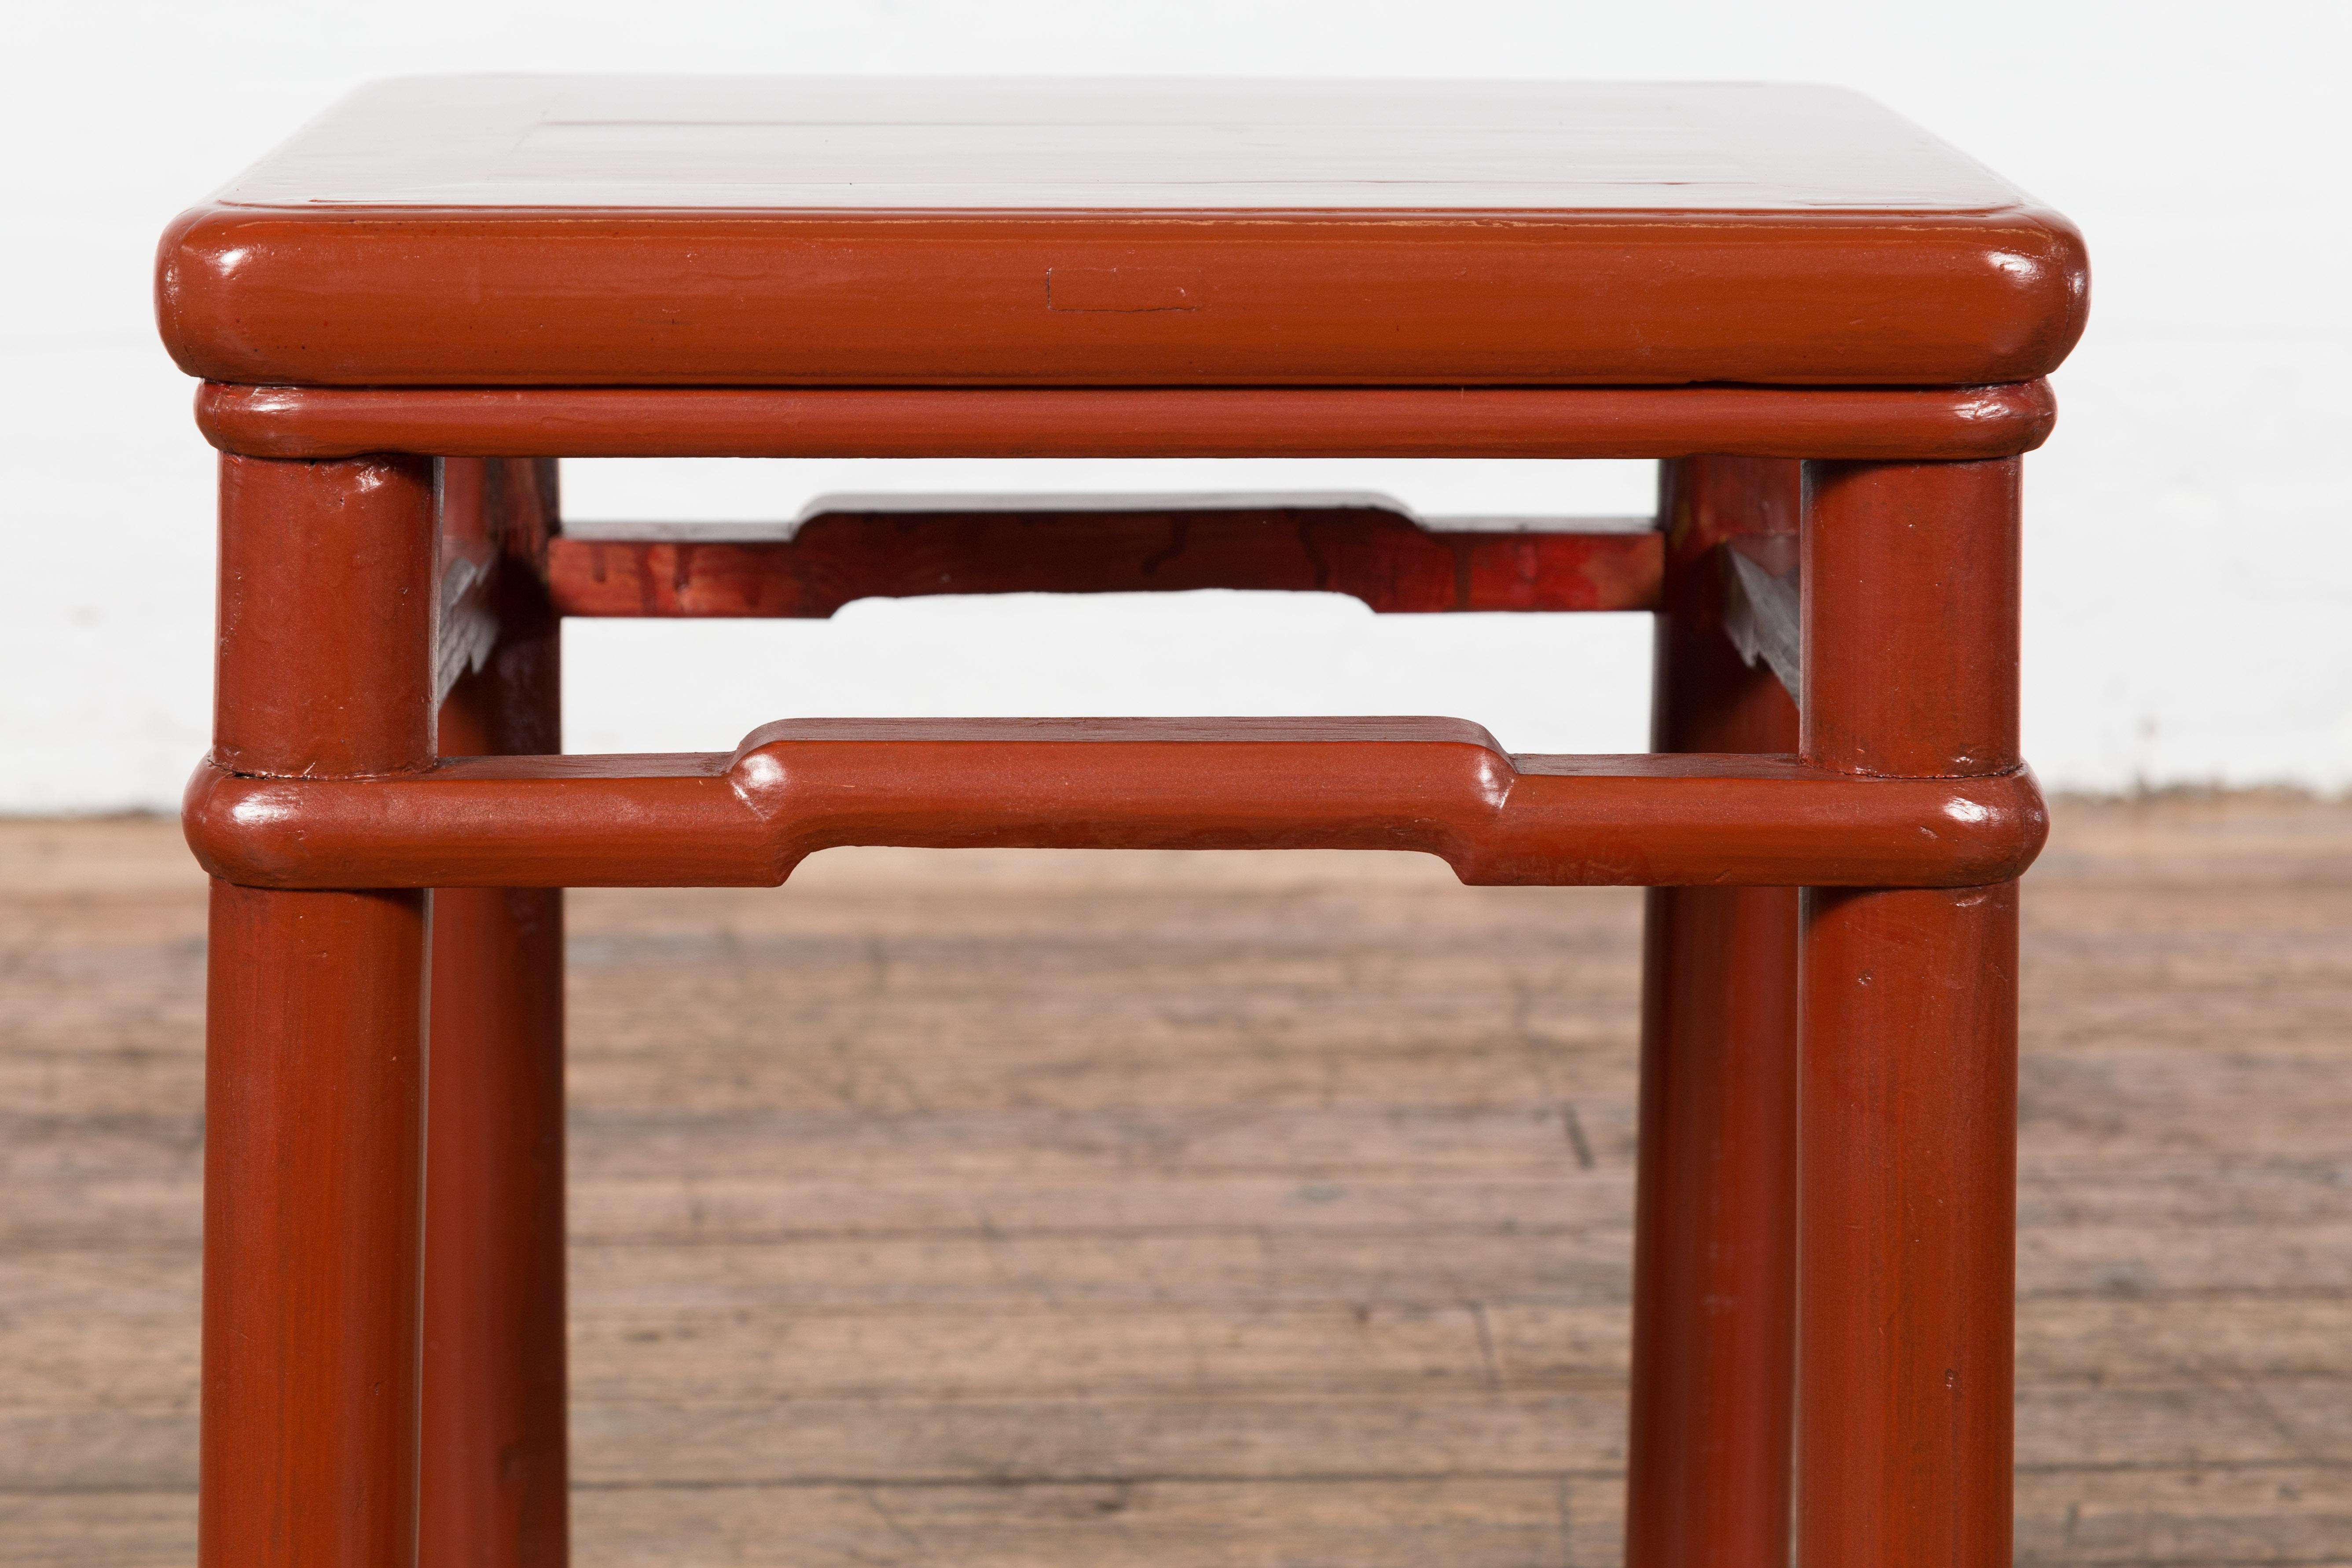 Chinese 1900s Qing Dynasty Red Lacquer Stool or Table with Humpback Stretchers For Sale 12